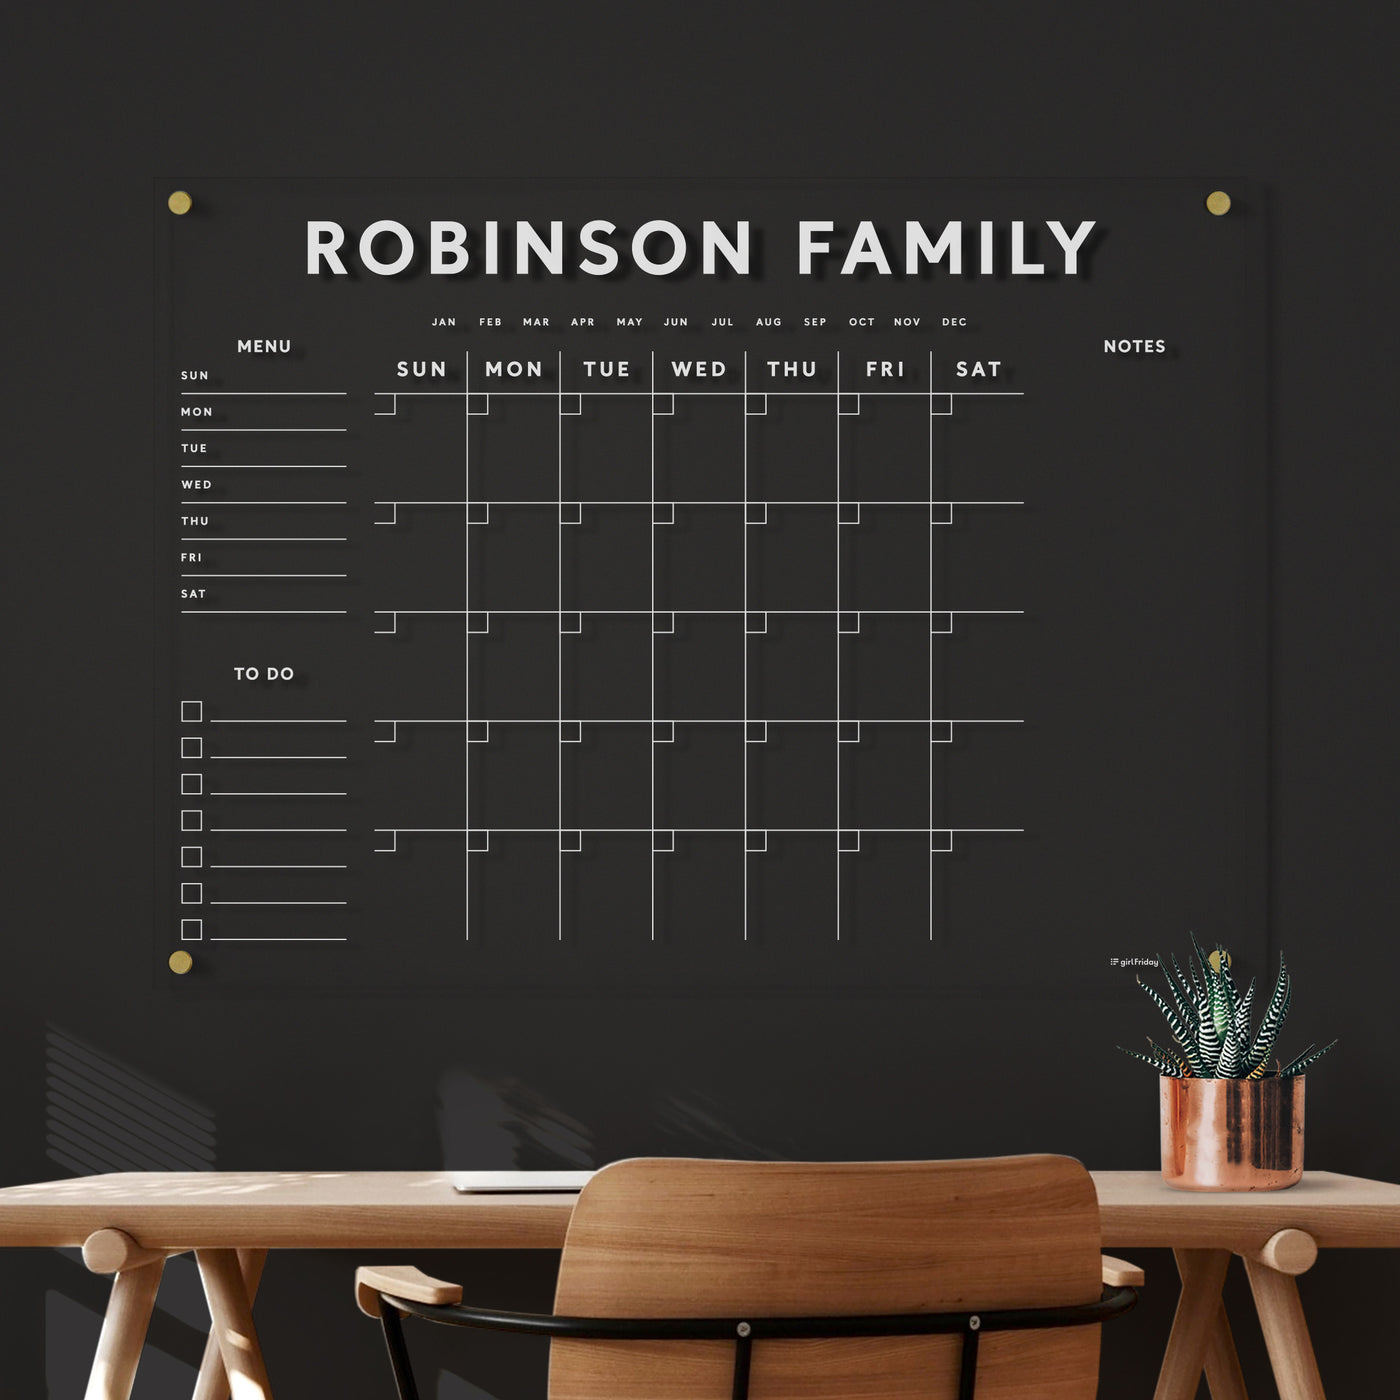 Acrylic Calendar with Family Name - Dry Erase Calendar for wall with white text